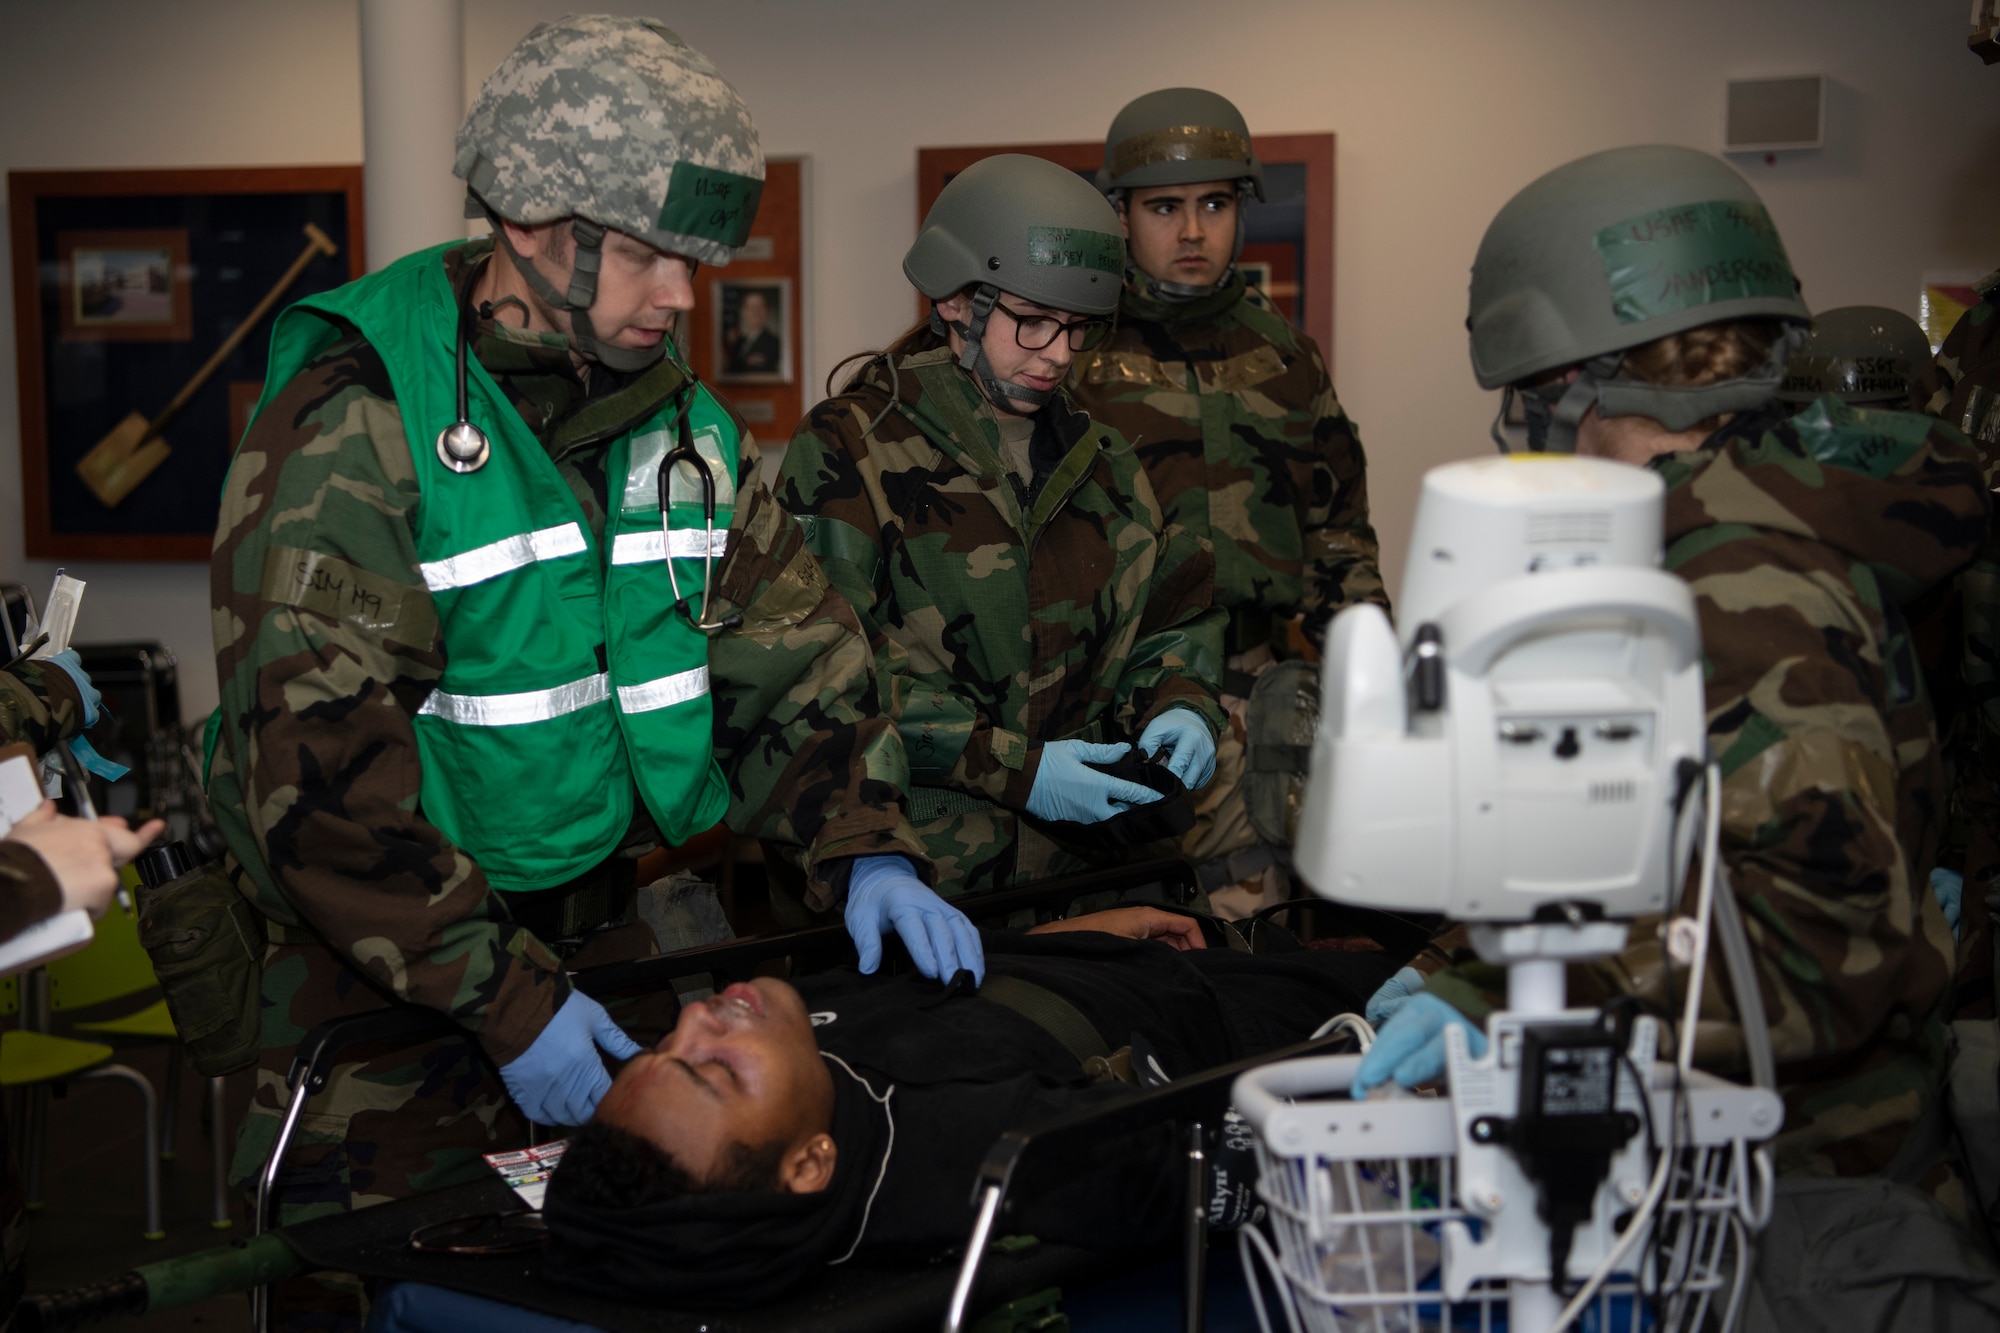 U.S. Air Force 52nd Medical Group Airmen assess a mock patient during exercise Sabre Storm, Nov. 3, 2021, on Spangdahlem Air Base, Germany. After the victim goes through the decontamination process, they begin evaluating the patient for injuries and potential contamination exposure. (U.S. Air Force photo by Staff Sgt. Melody W. Howley)